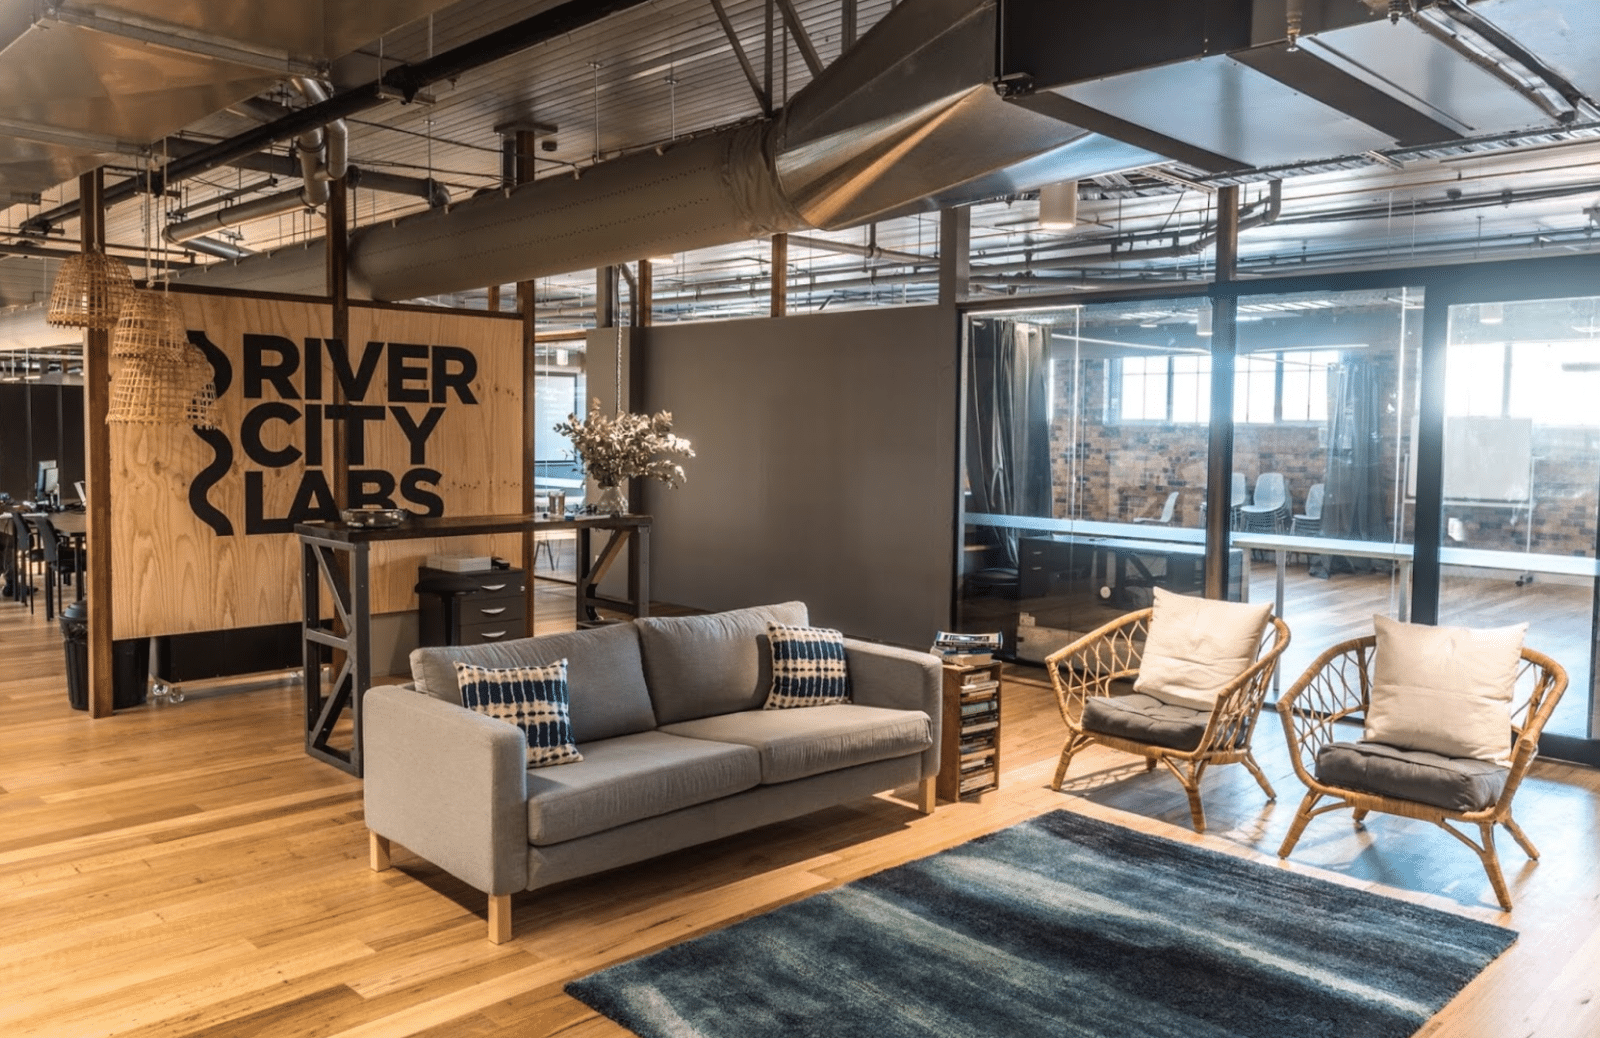 River City Labs - Start up brand design and strategy